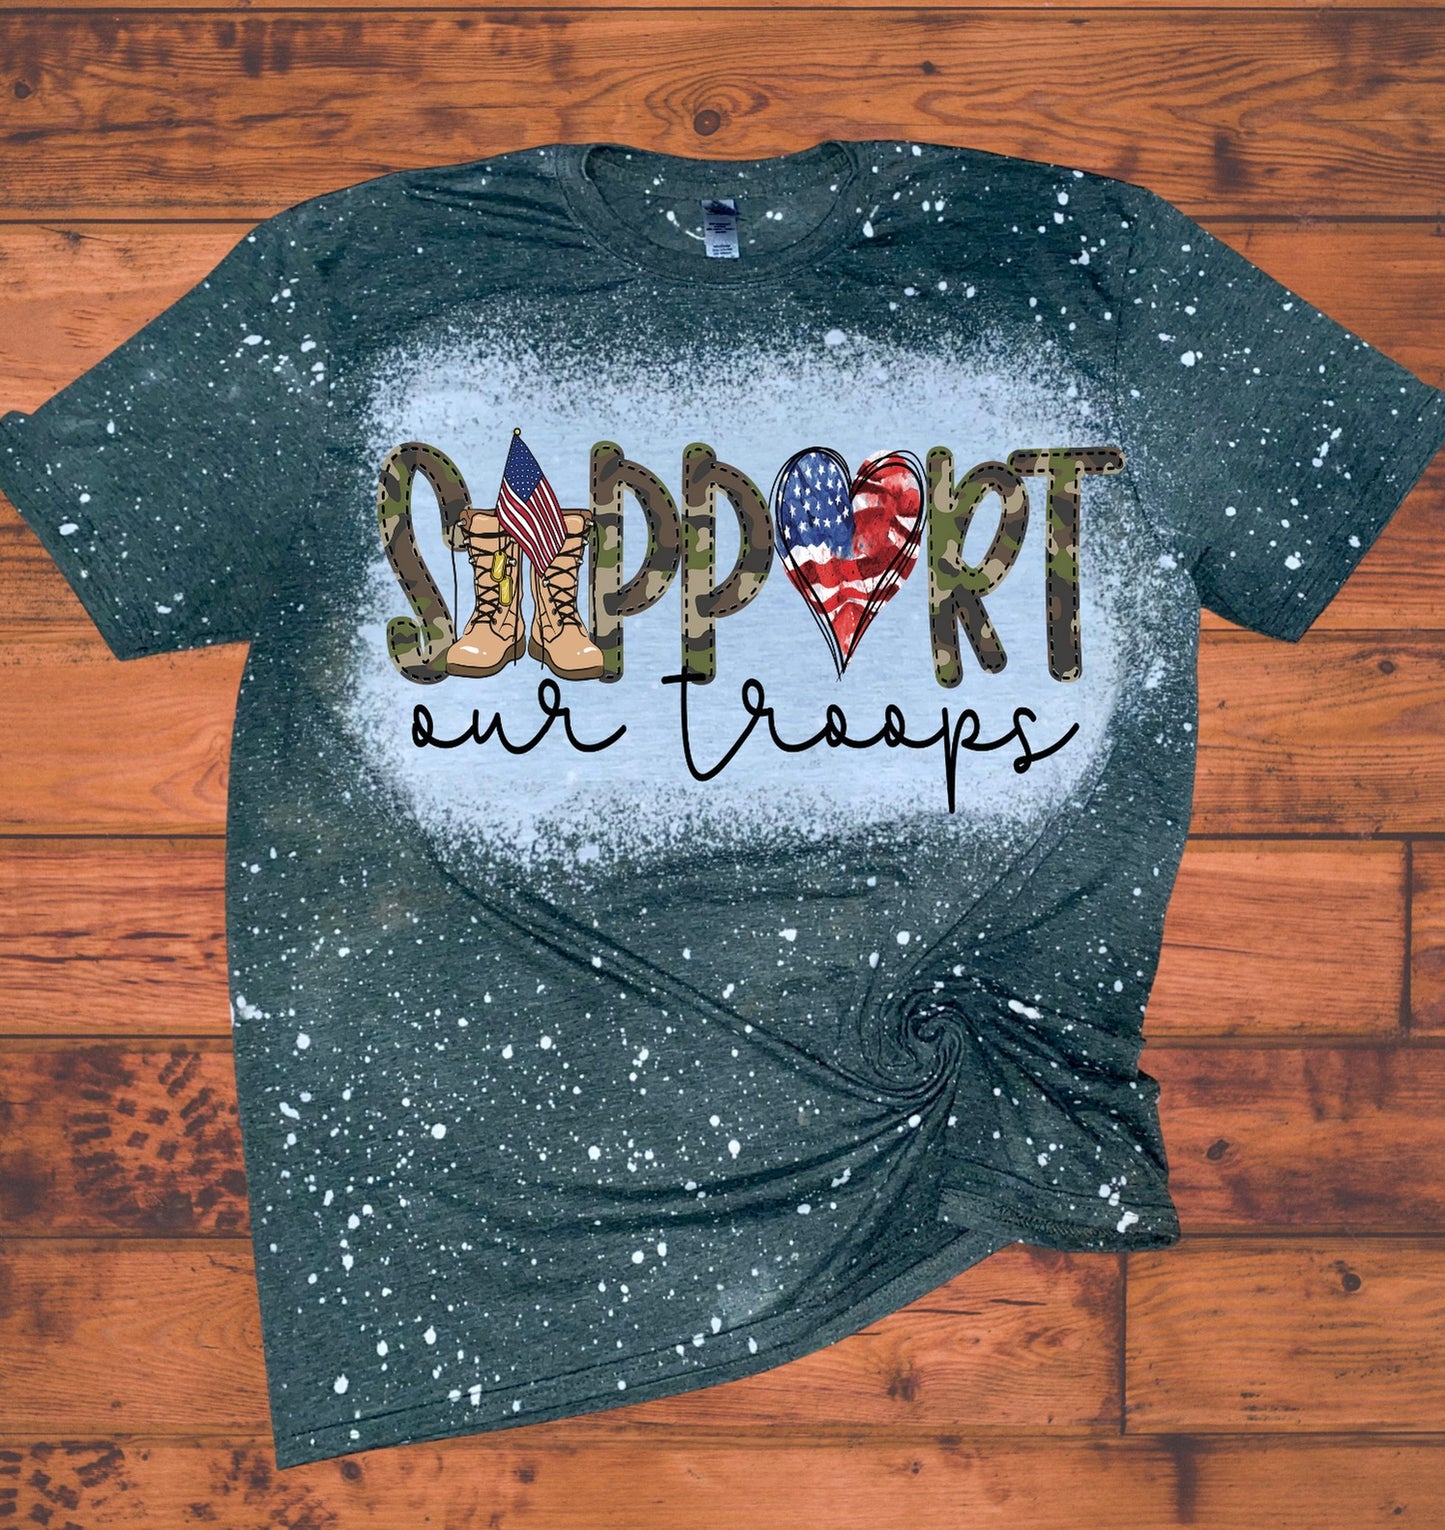 Bleached support our troops tee